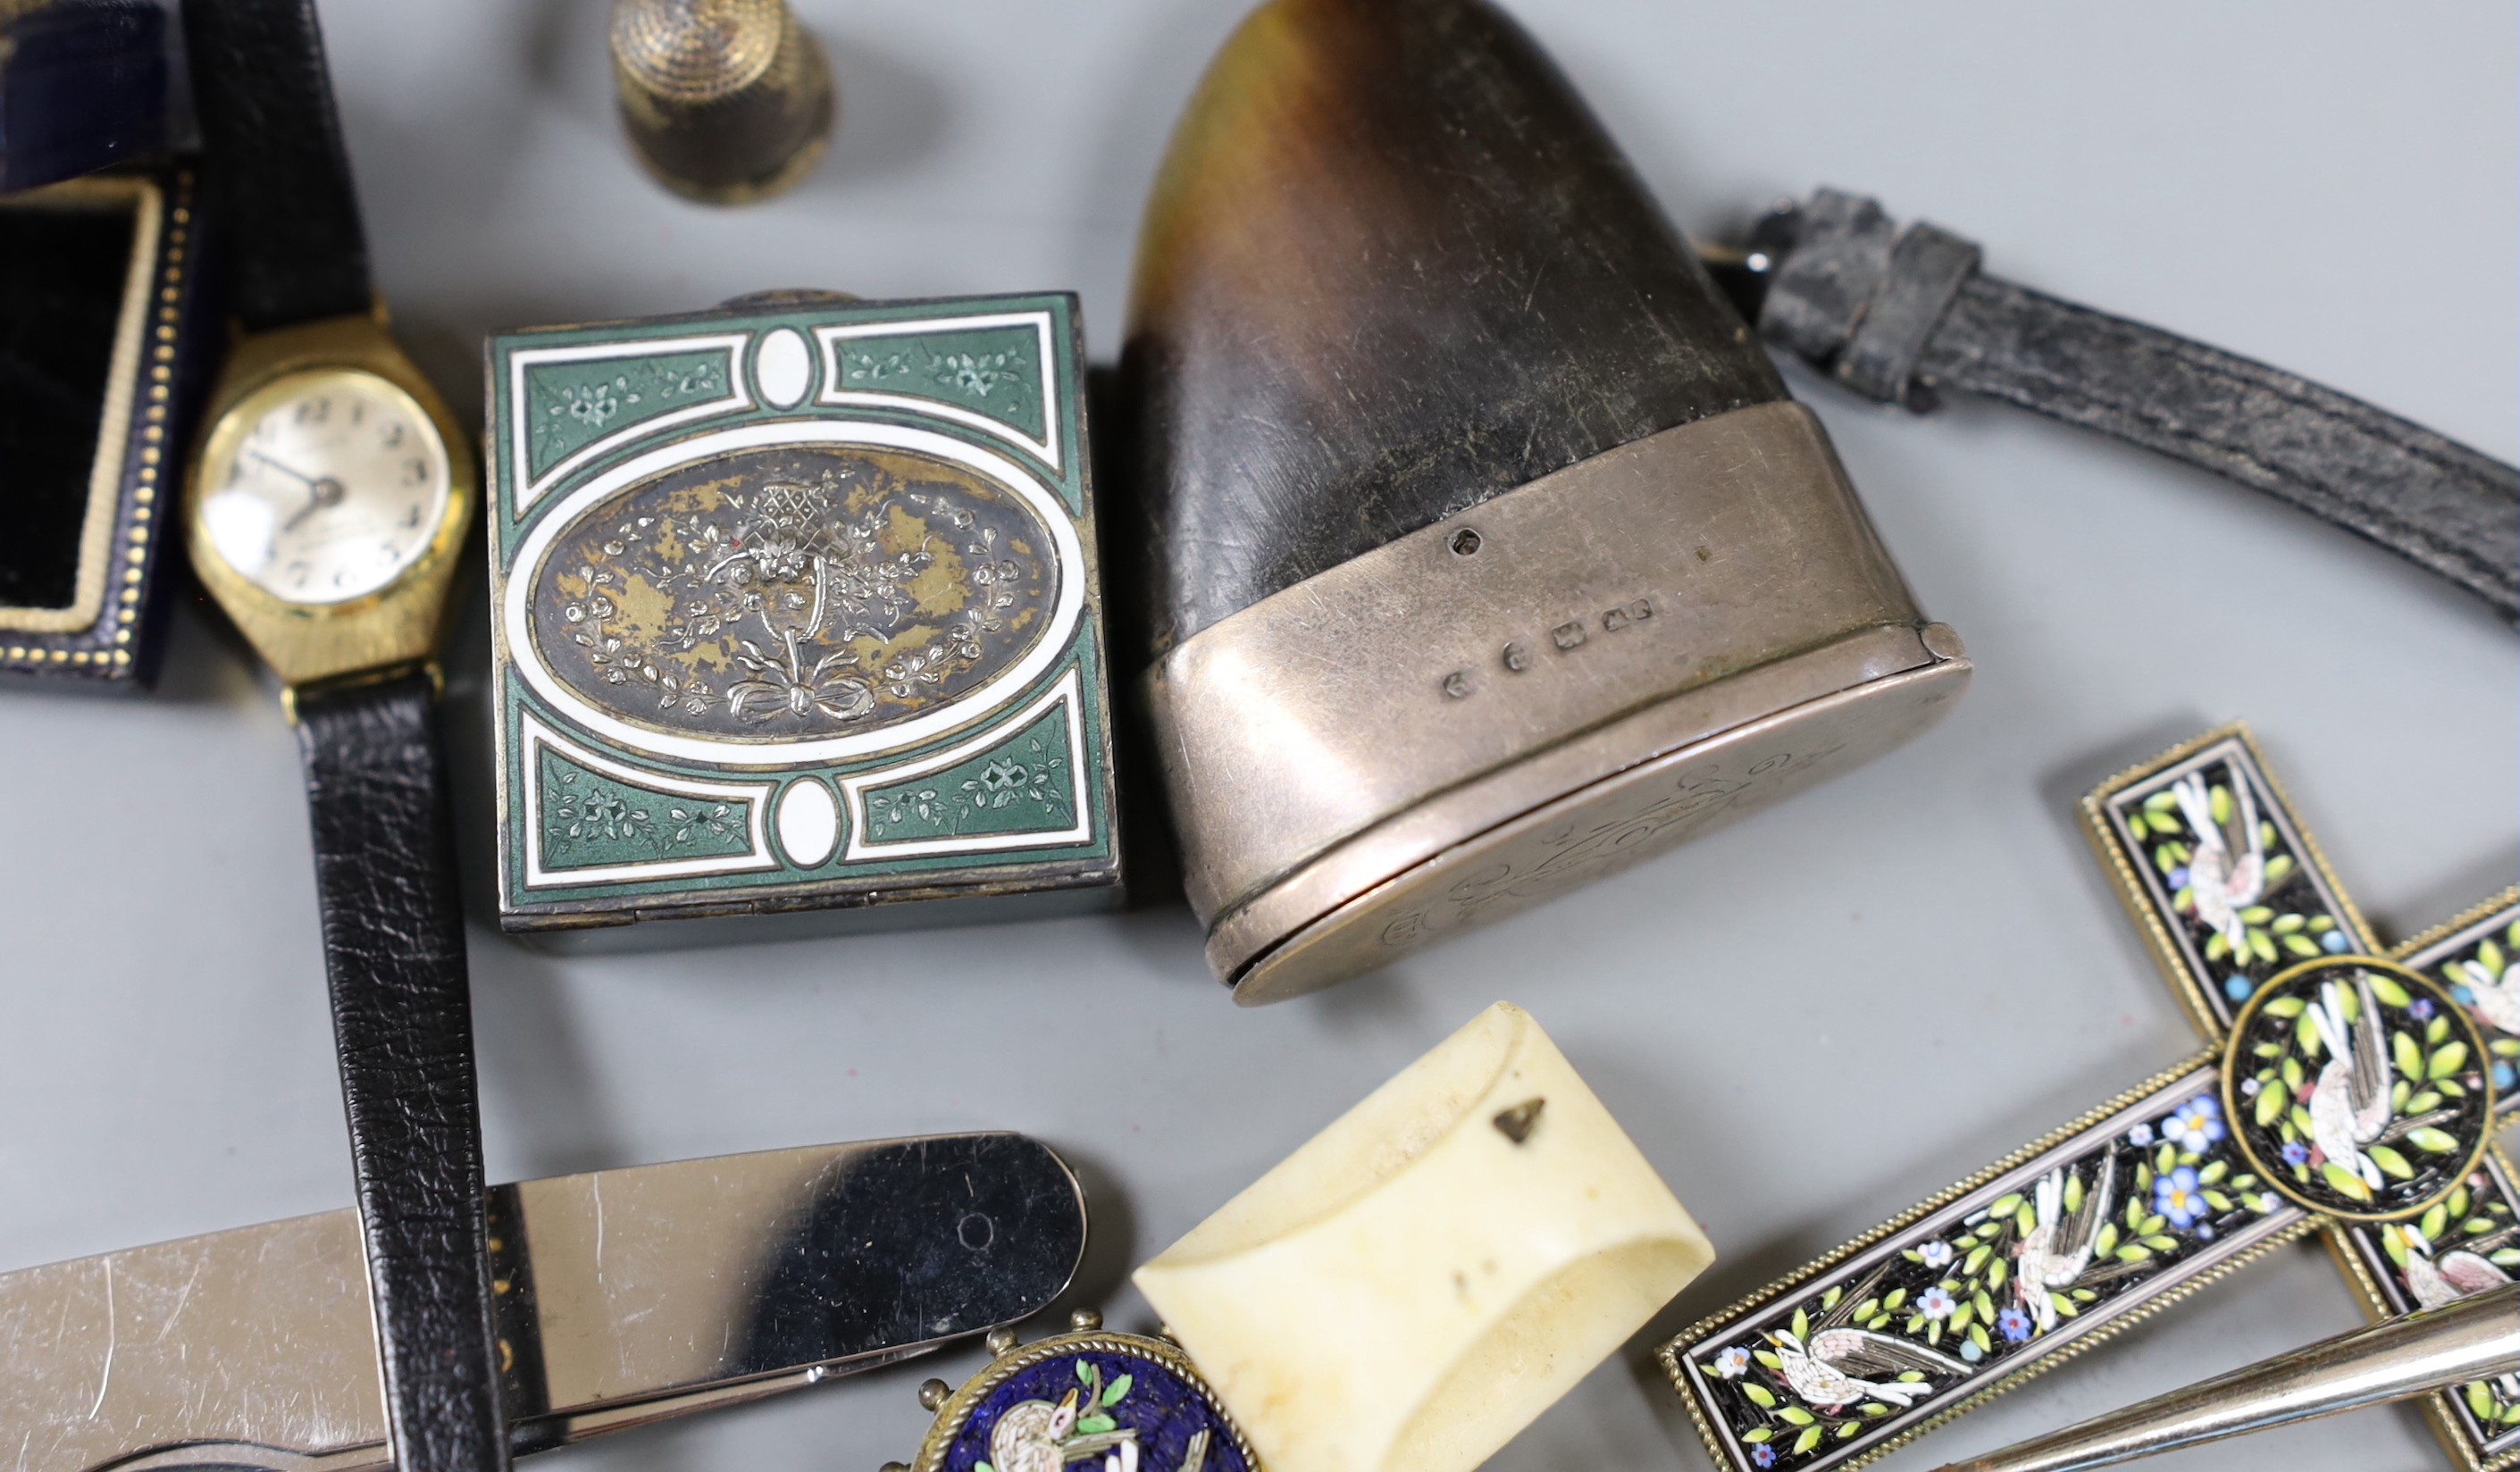 An early 20th century lady's 9ct gold wrist watch and sundry minor jewellery and accessories, including a German 950 white metal and enamel pill box.